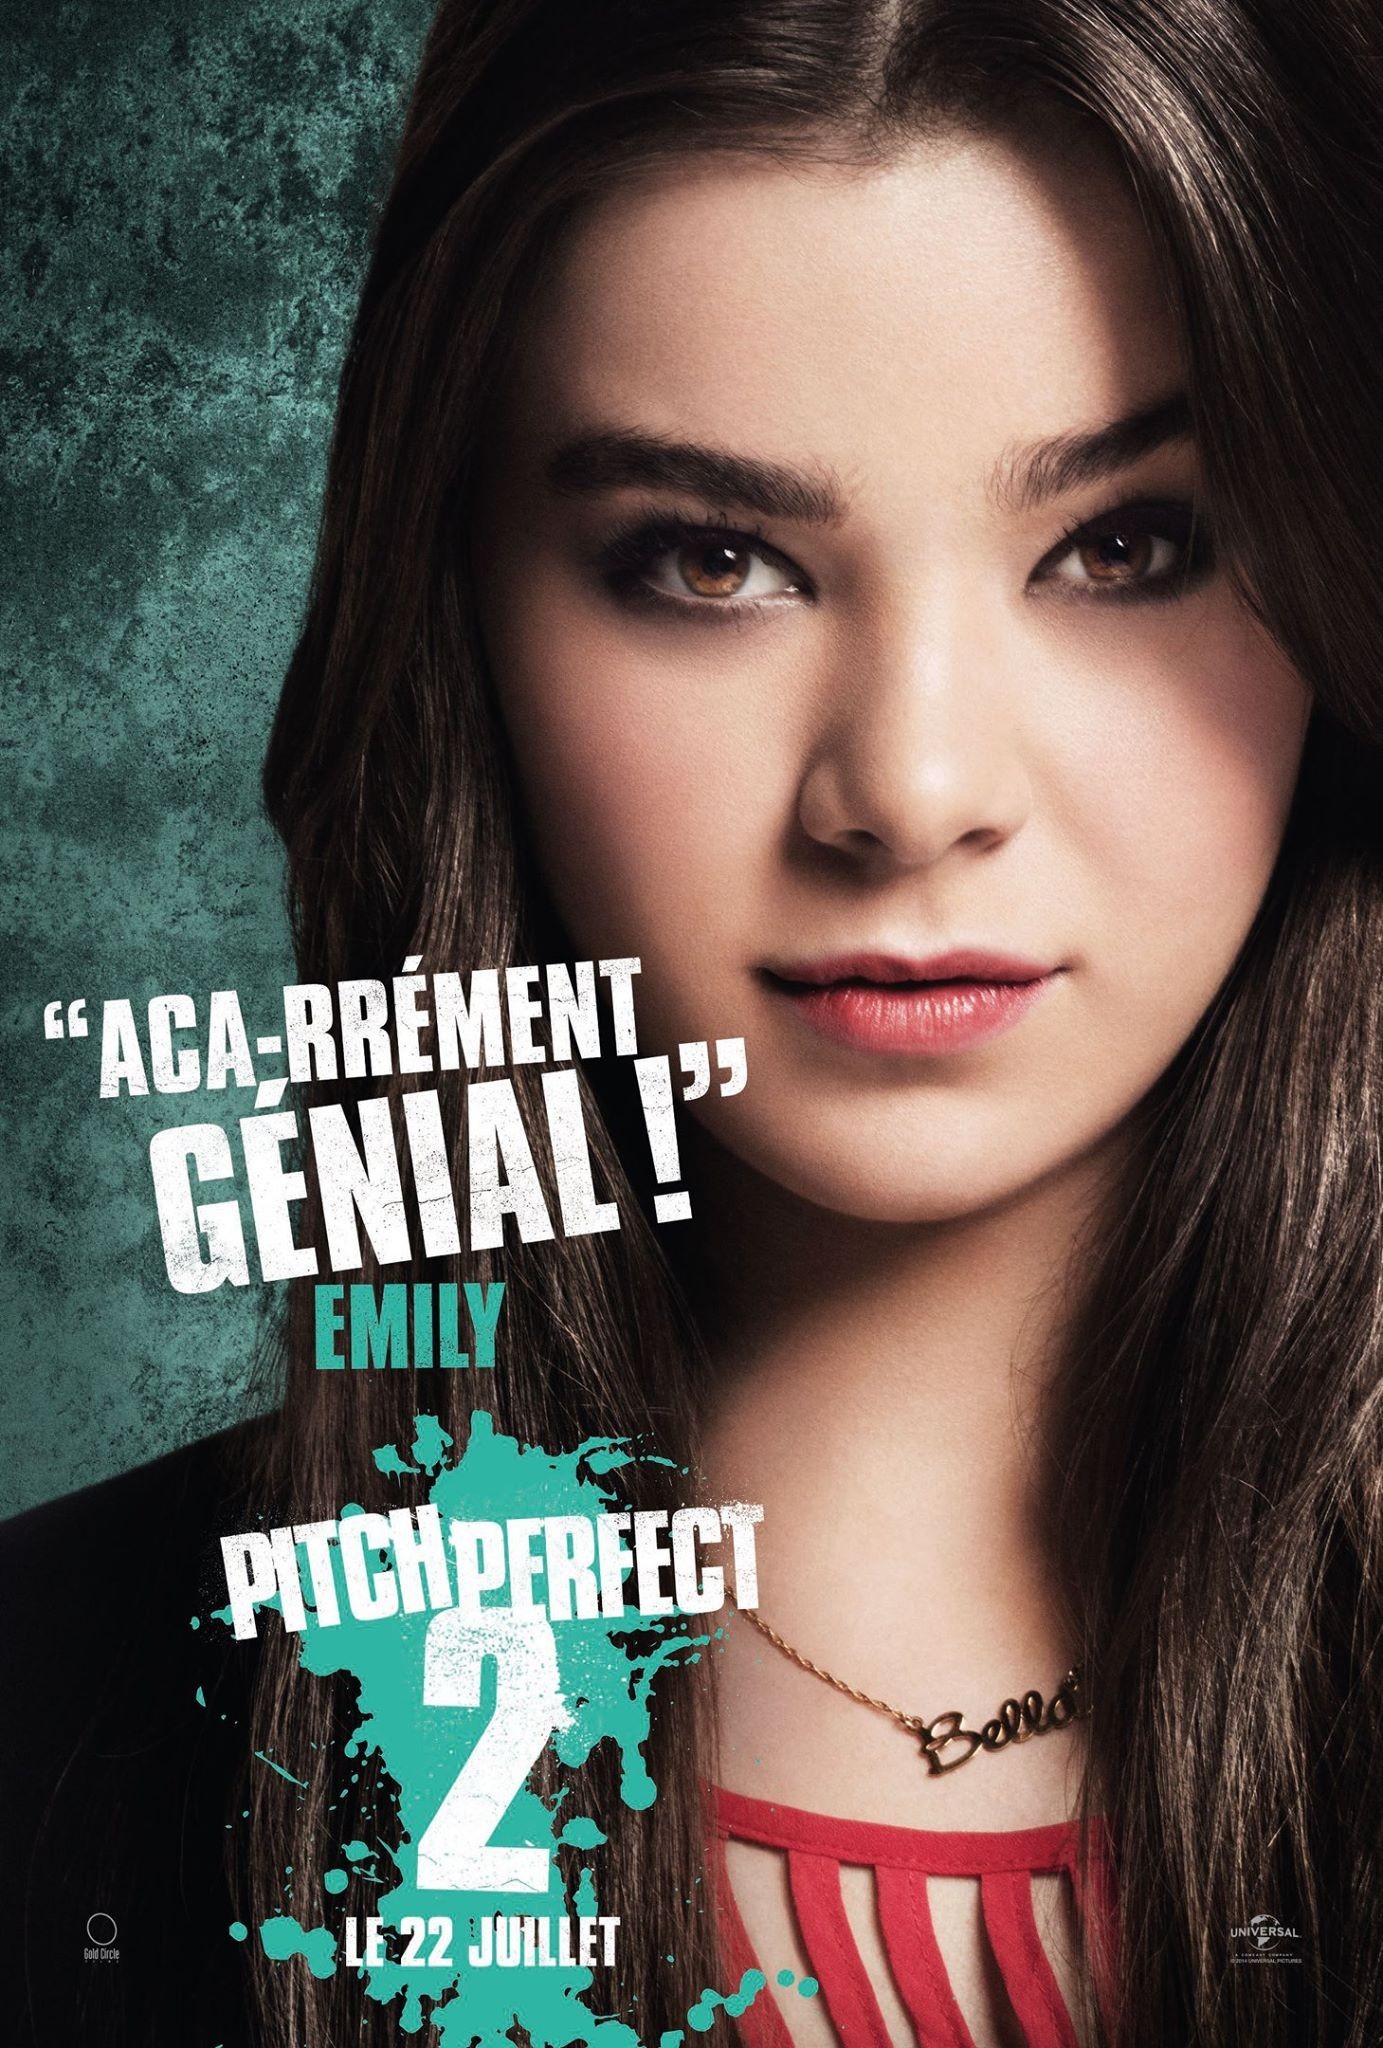 Emily junk pitch perfect 2